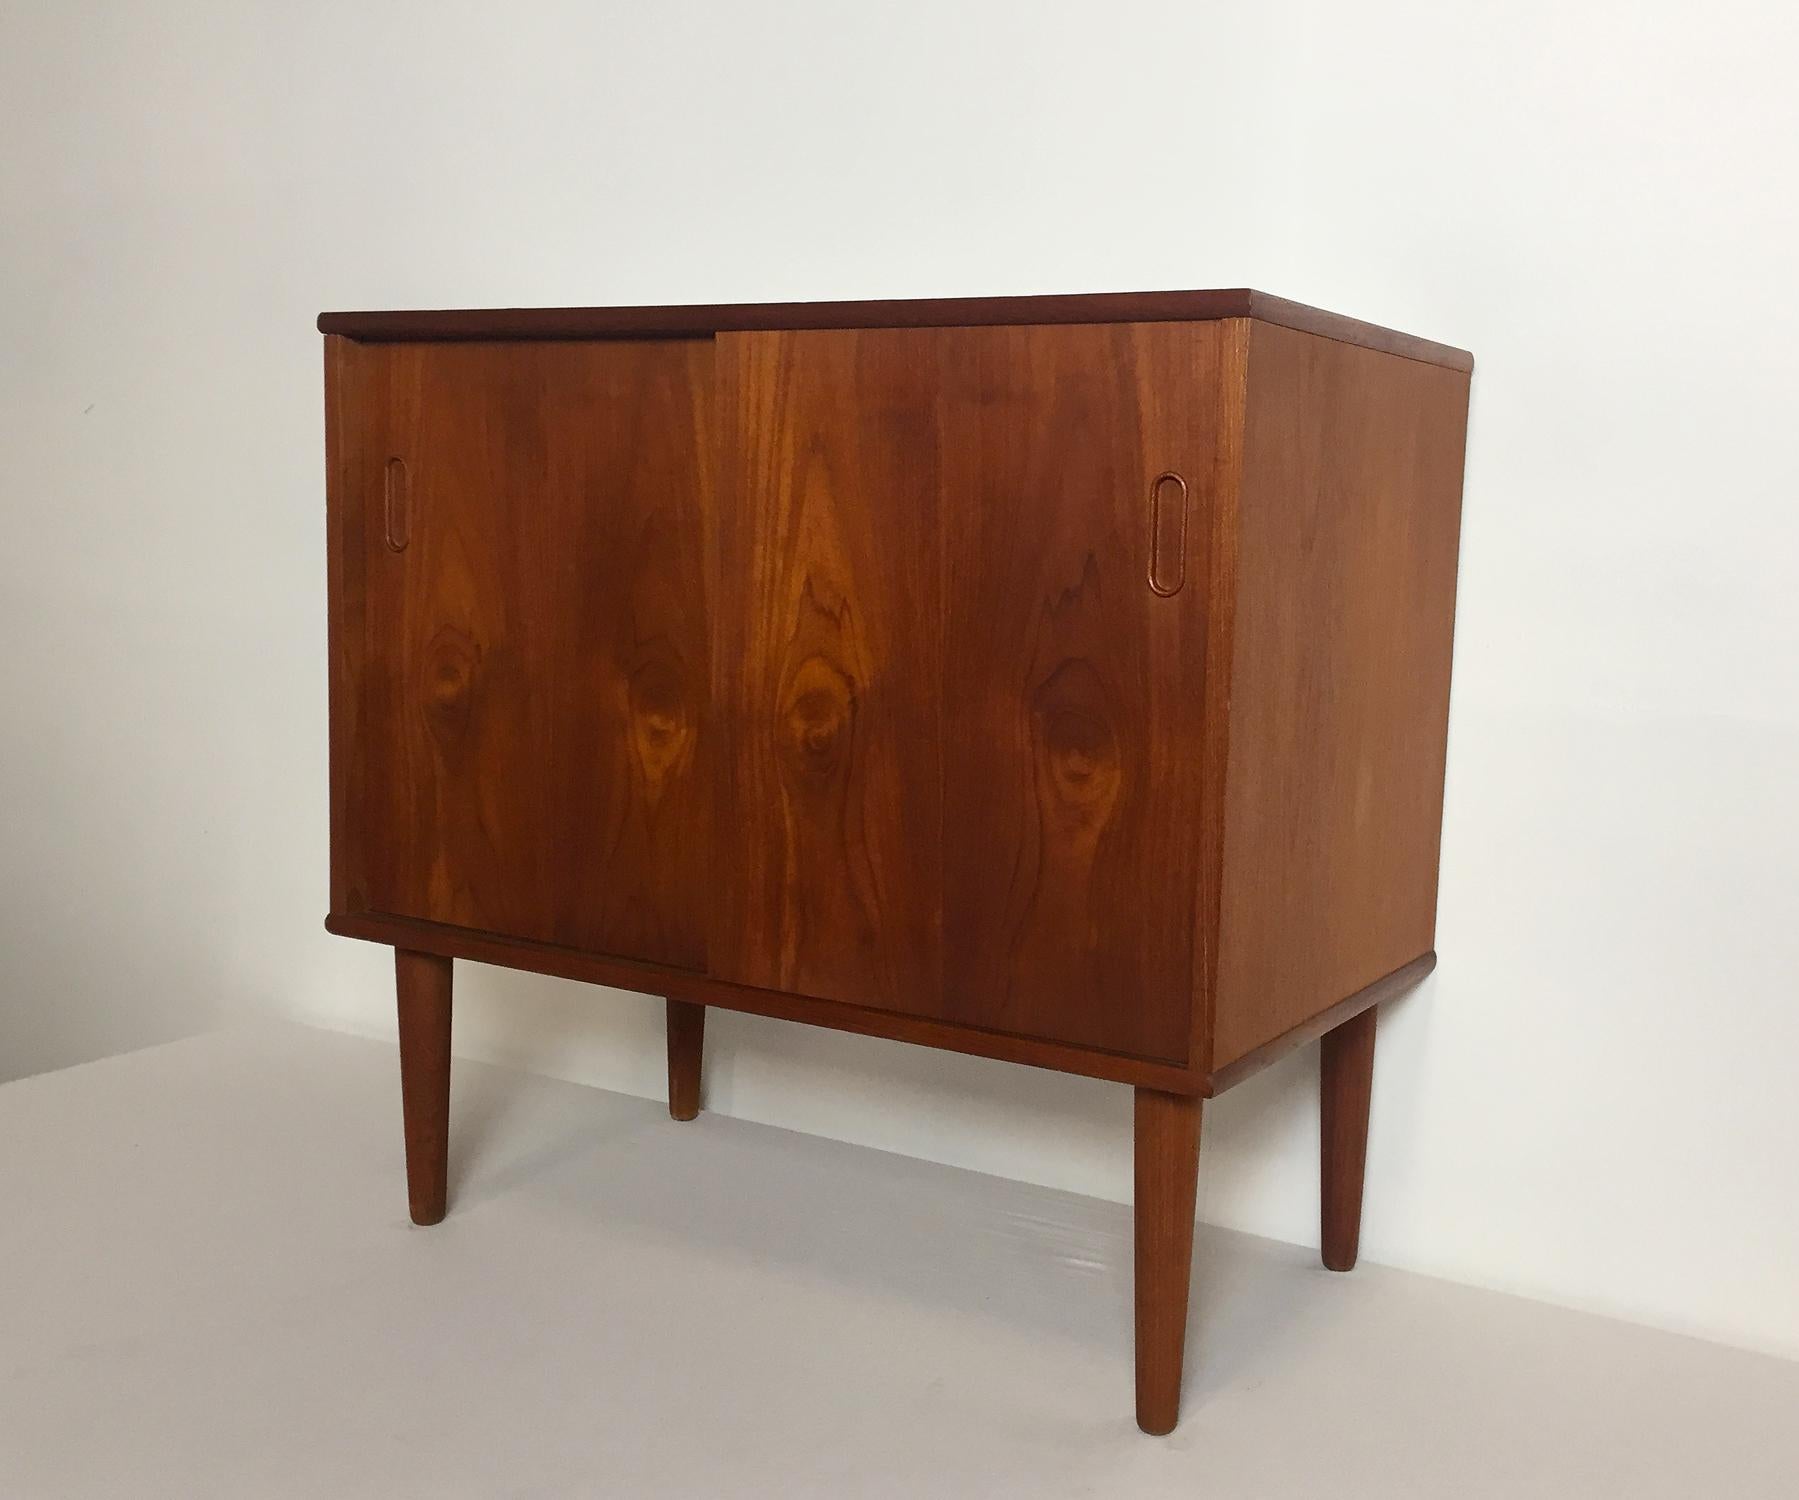 Danish cabinet made of veneered teak wood, 1960s. Front with two sliding doors and a single shelf inside. Tapered massive teak legs with brass detail.
Good condition. Signs of wear consistent with age and use.

Dimensions: 
Height 74.5 cm
Width